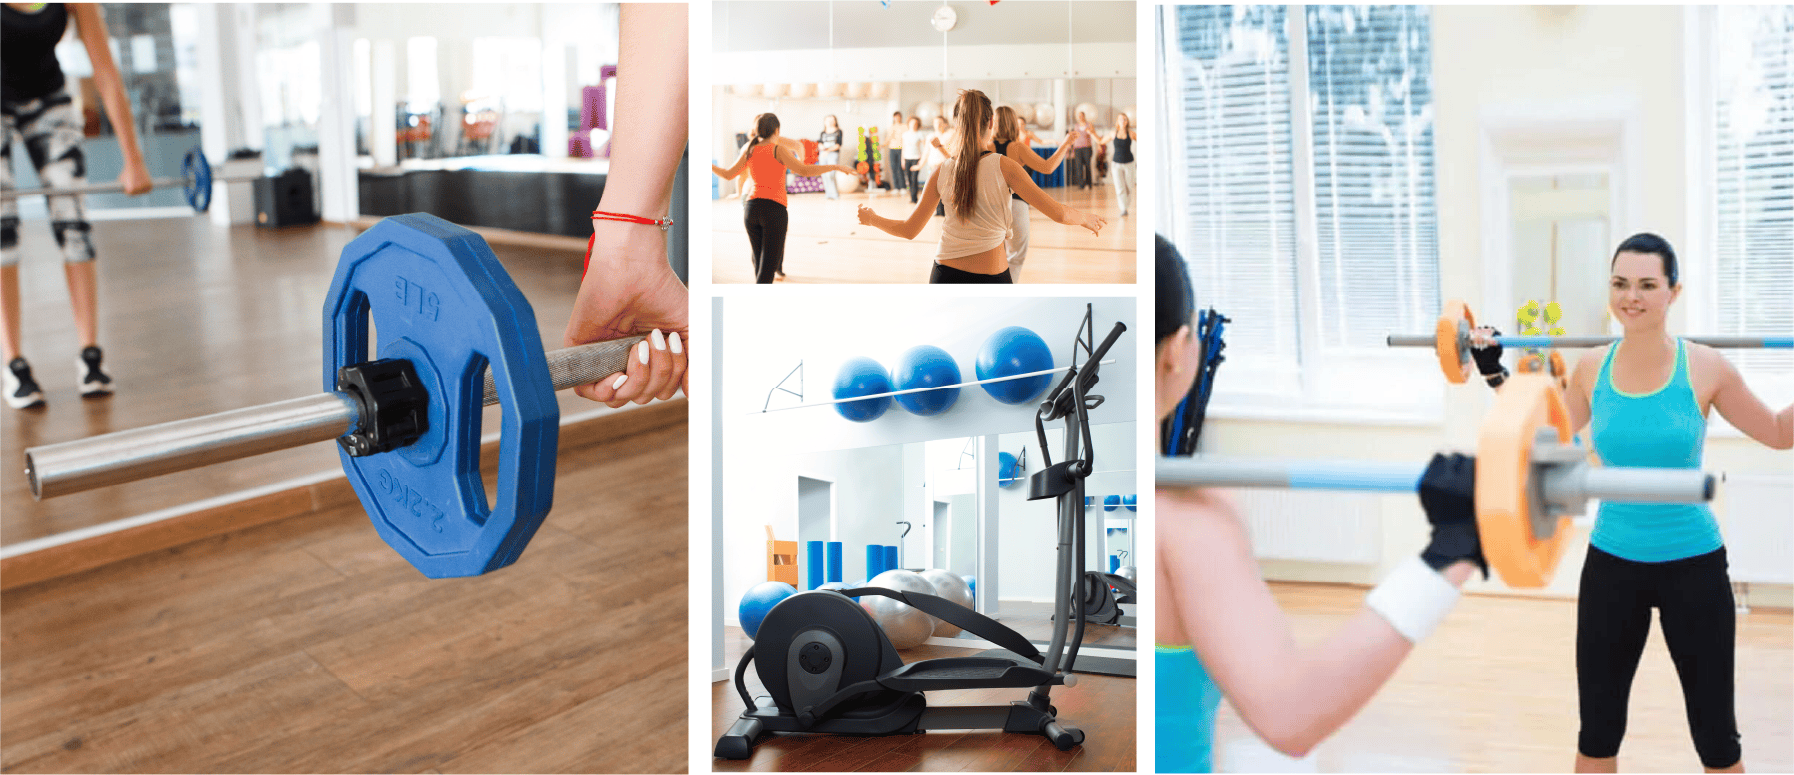 A collage of exercise equipment, including treadmills, weights, and bikes, with gym mirrors in the background.